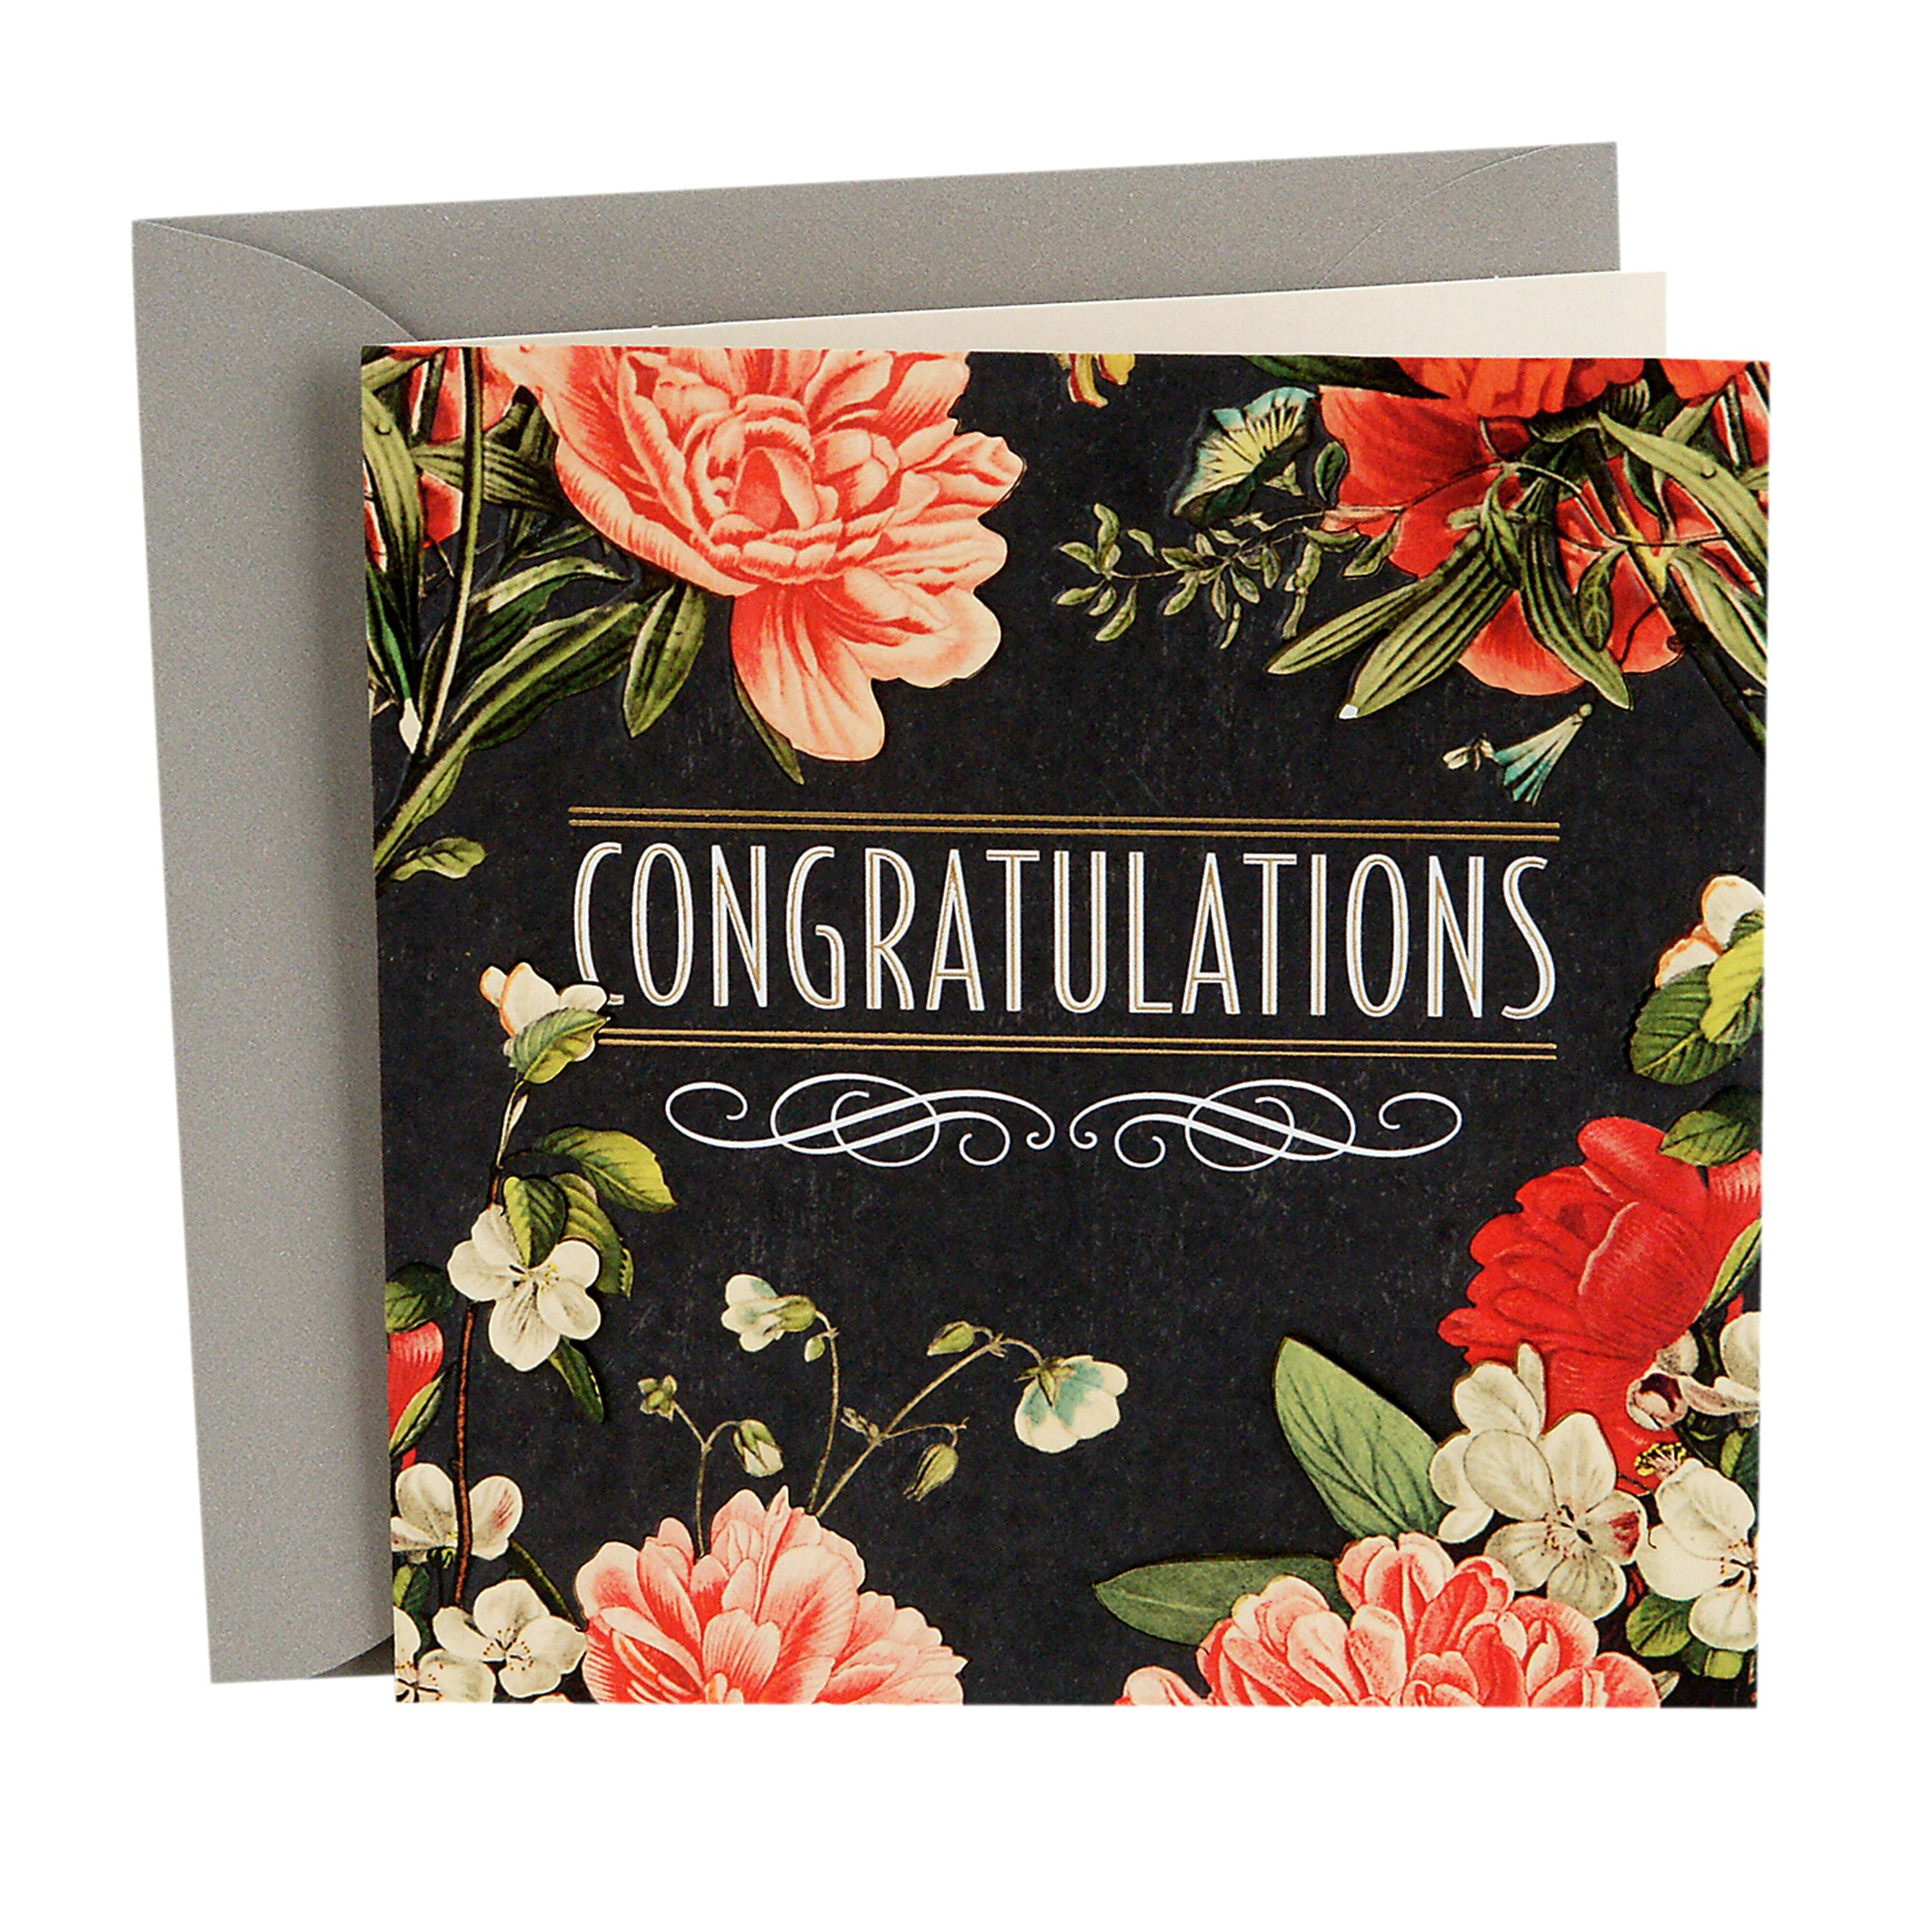 Bride and Groom Perfect for Wedding Newlywed Gold Foil Floral Design and Mrs Mr Envelopes Included Engagement Wedding Greeting Cards 5 x 7 Inches 24-Pack Wedding Congratulations Cards Bulk